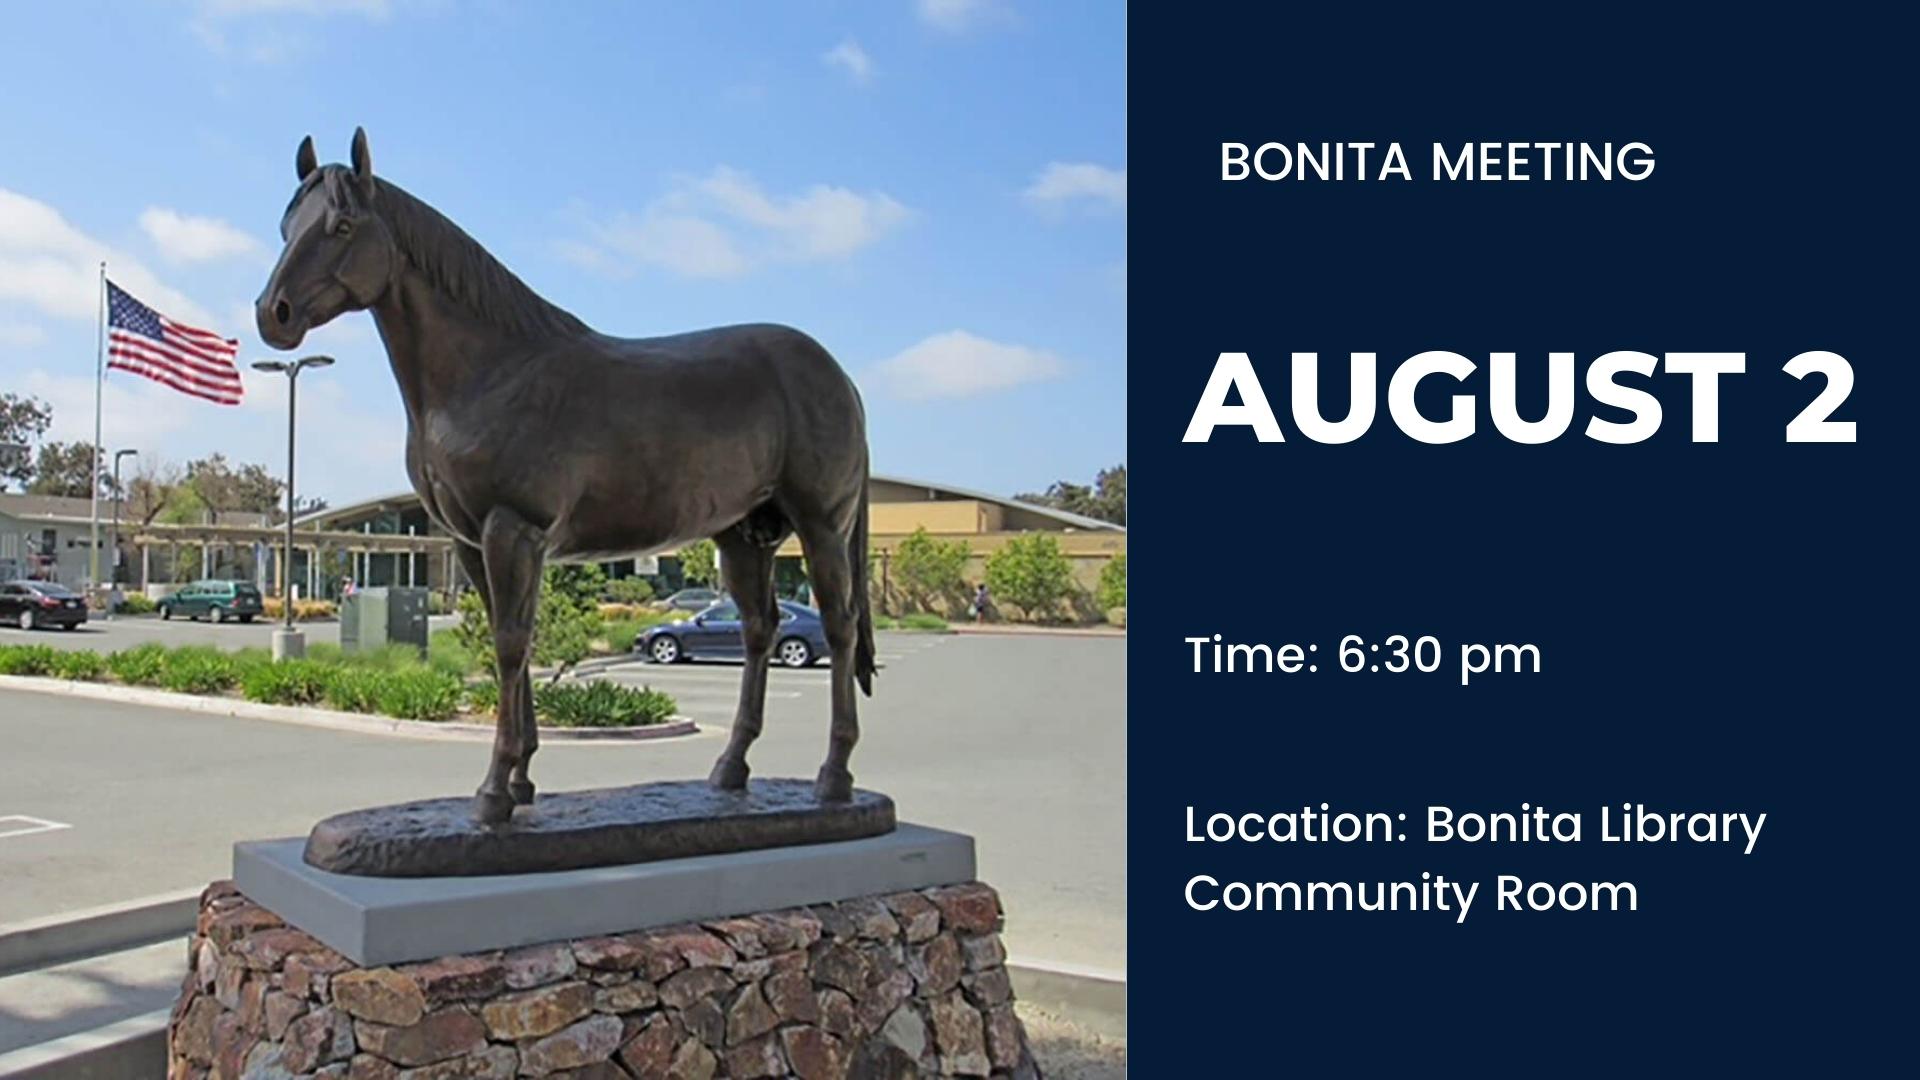 Please join the SVCA for their upcoming August 2nd meeting to discuss news and important information on community topics. Read more.